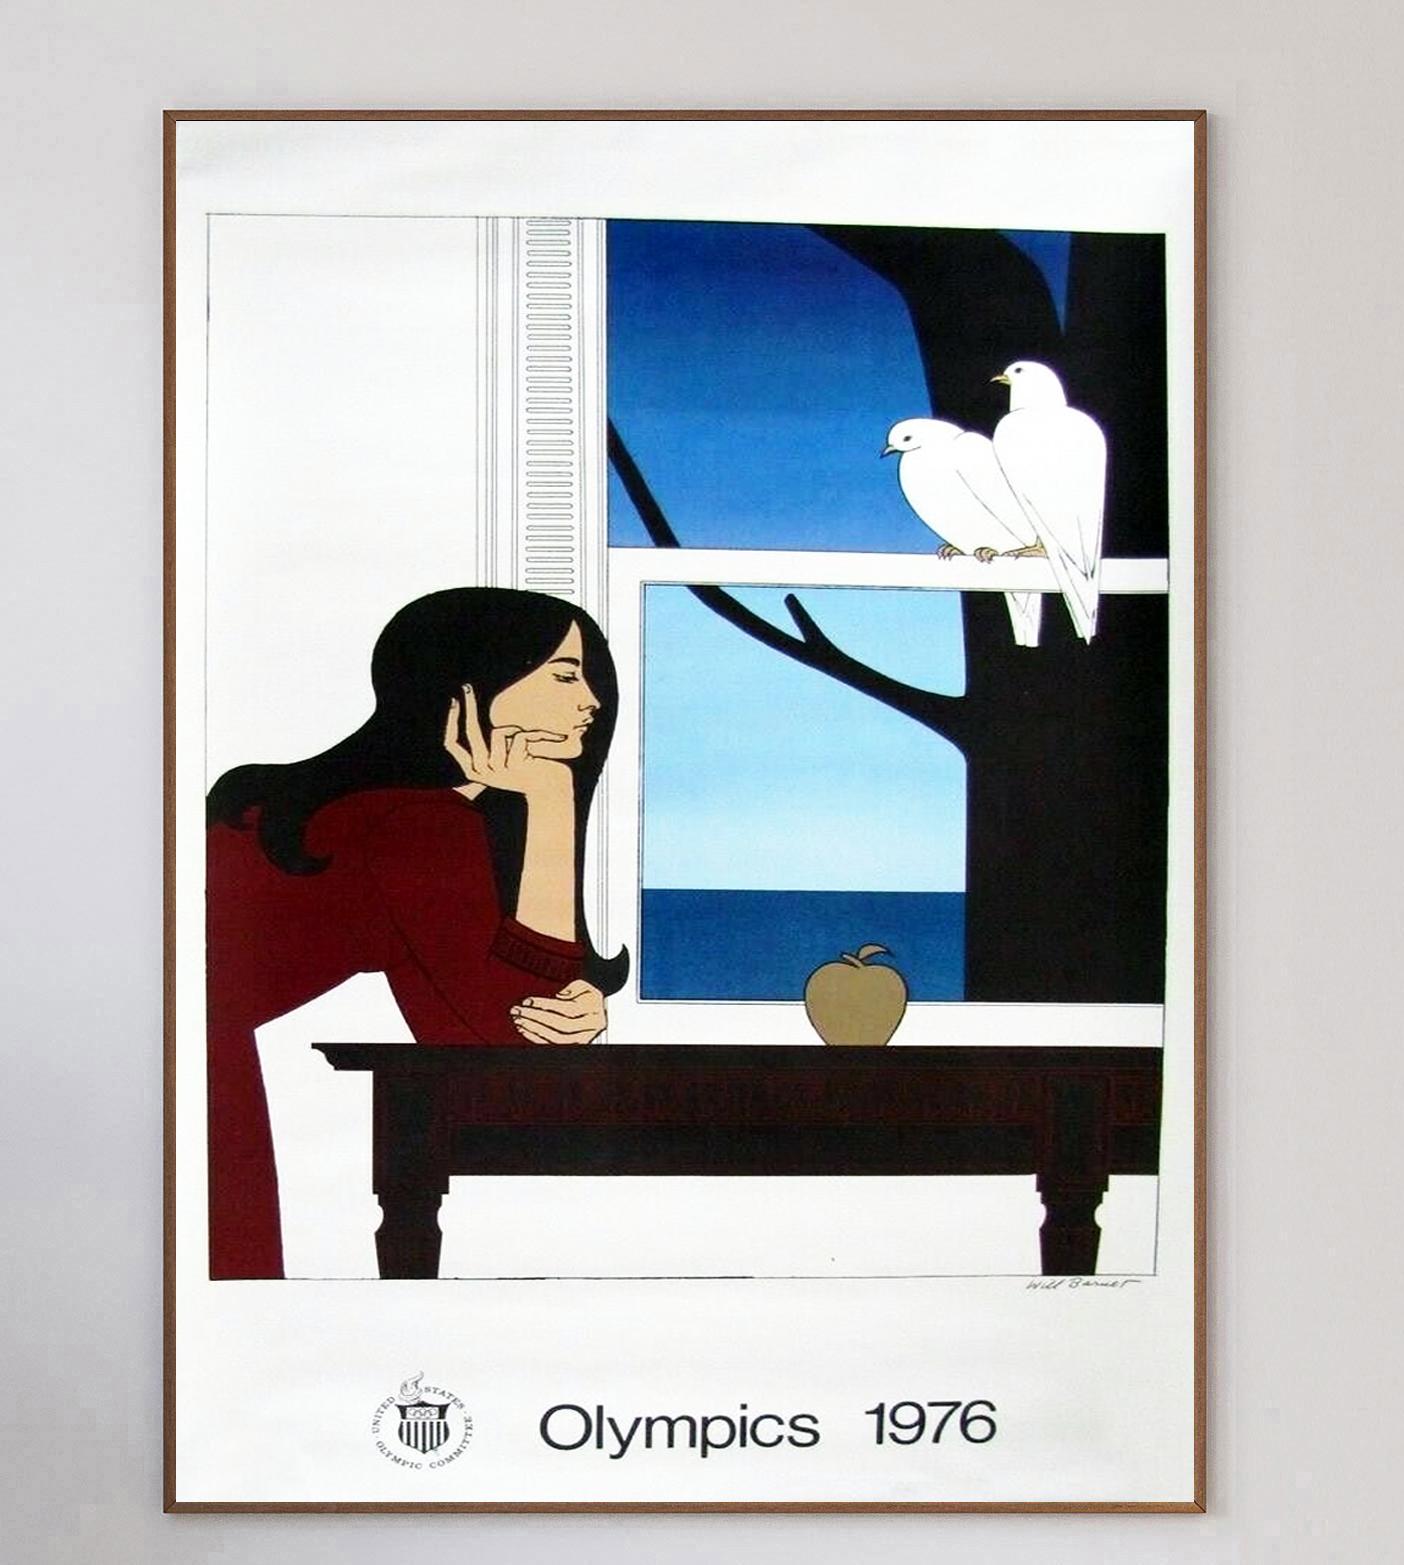 American artist Will Barnet was one of several artist commissioned to create fine art posters in promotion of the 1976 Montreal Summer Olympic Games. The games, the first and only Summer games to be held in Canada, was won by the Soviet Union, with